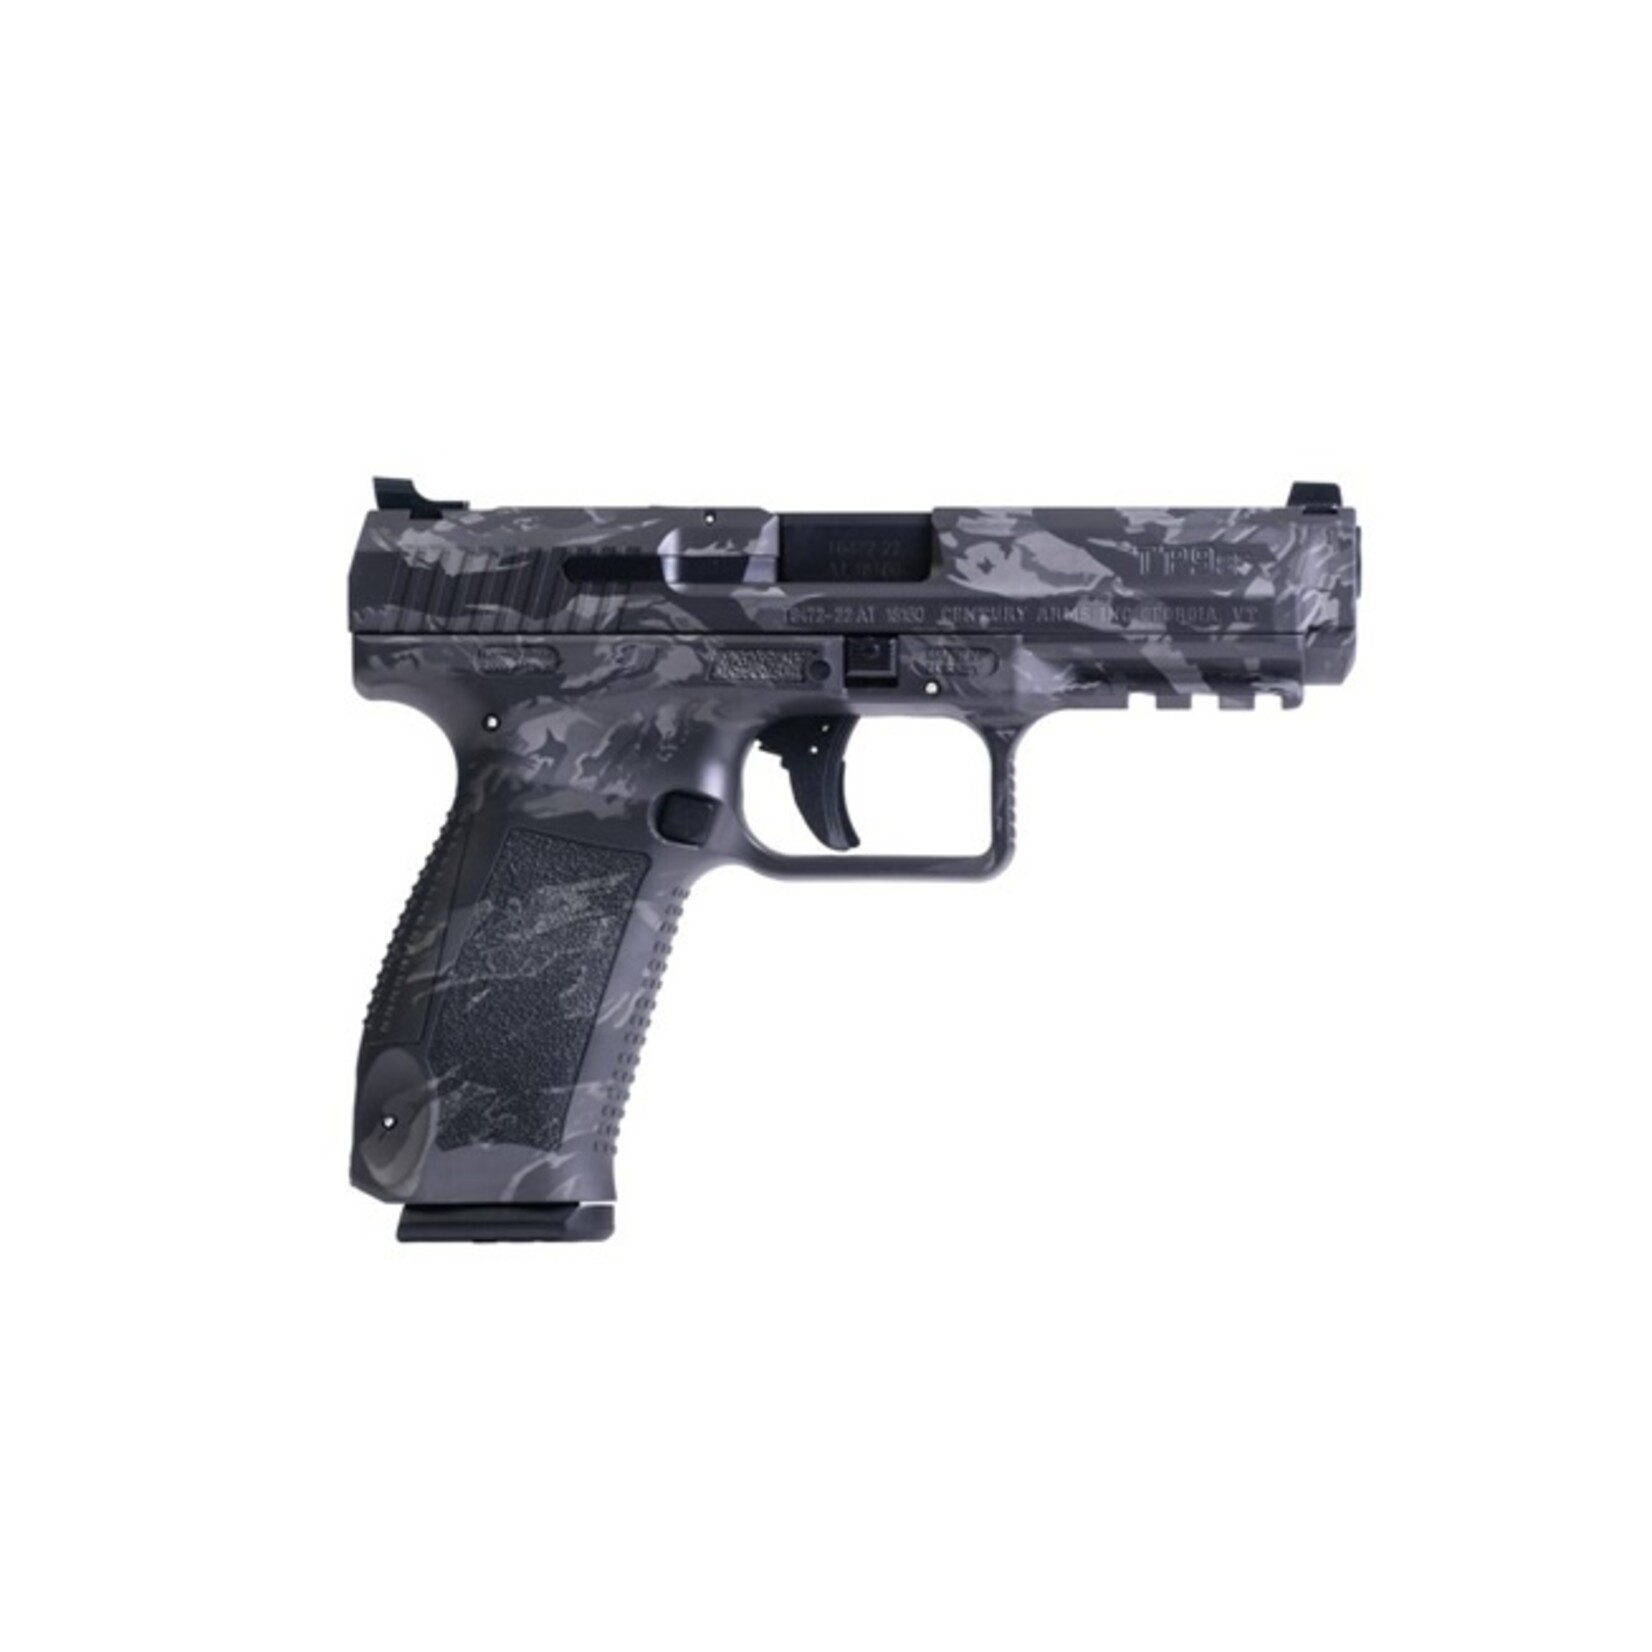 CANIK ARMS CANIK, TP9SF, 9MM, 4.5"BBL, TIGER GRY, 18+1